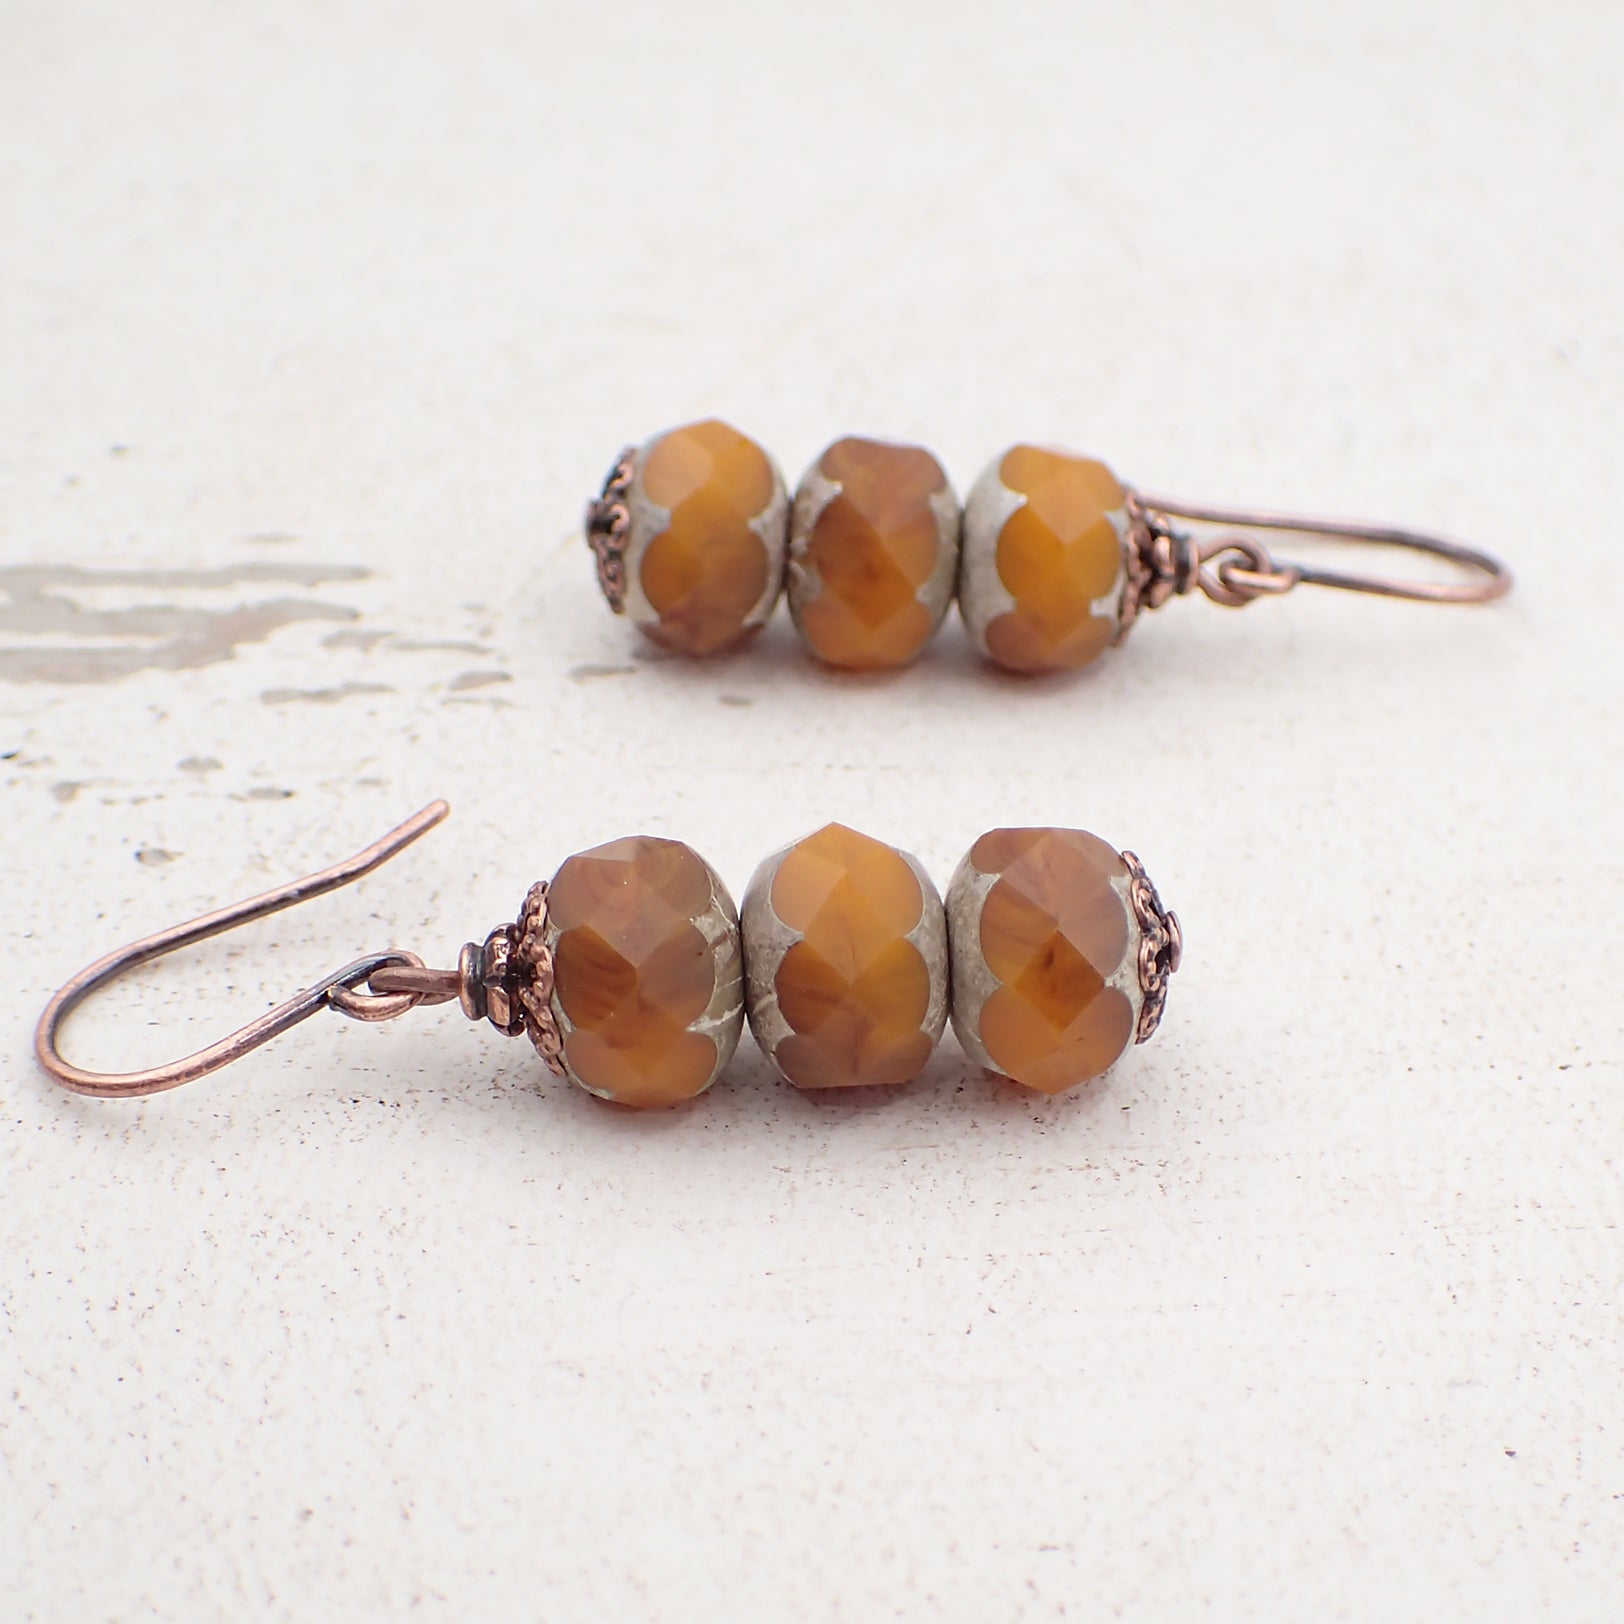 Pumpkin Orange Artisan Czech Glass Stacked Rondelle Earrings with Antiqued Copper